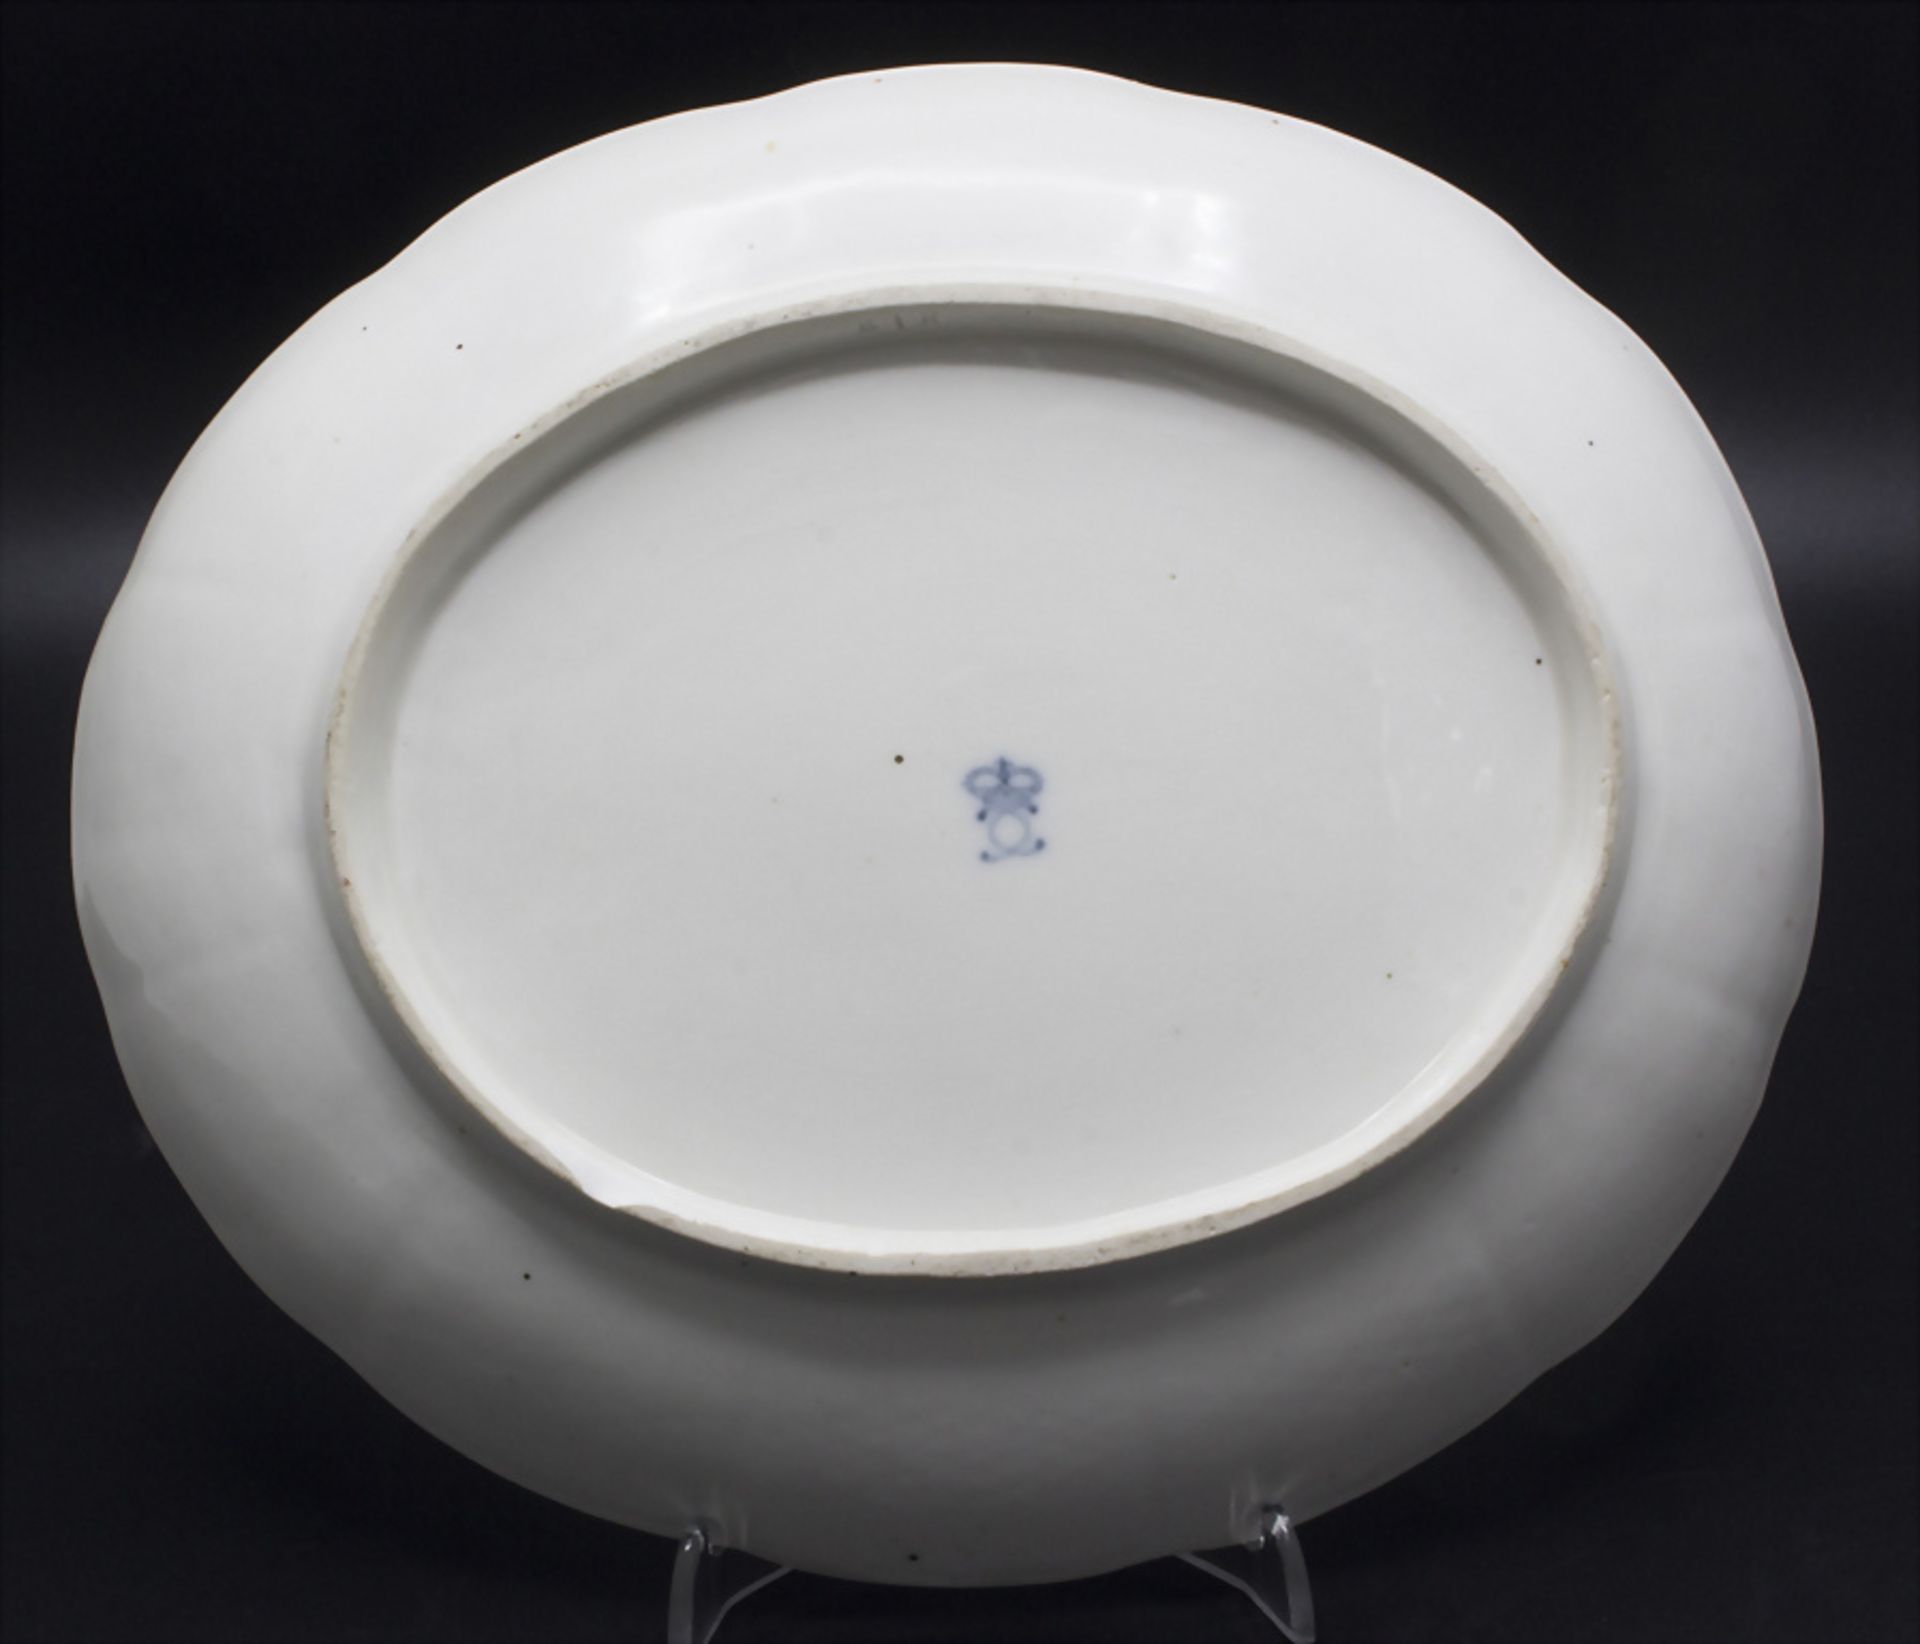 Schale mit Blumenmalerei / A bowl with flowers, Ludwigsburg, um 1770 - Image 3 of 4